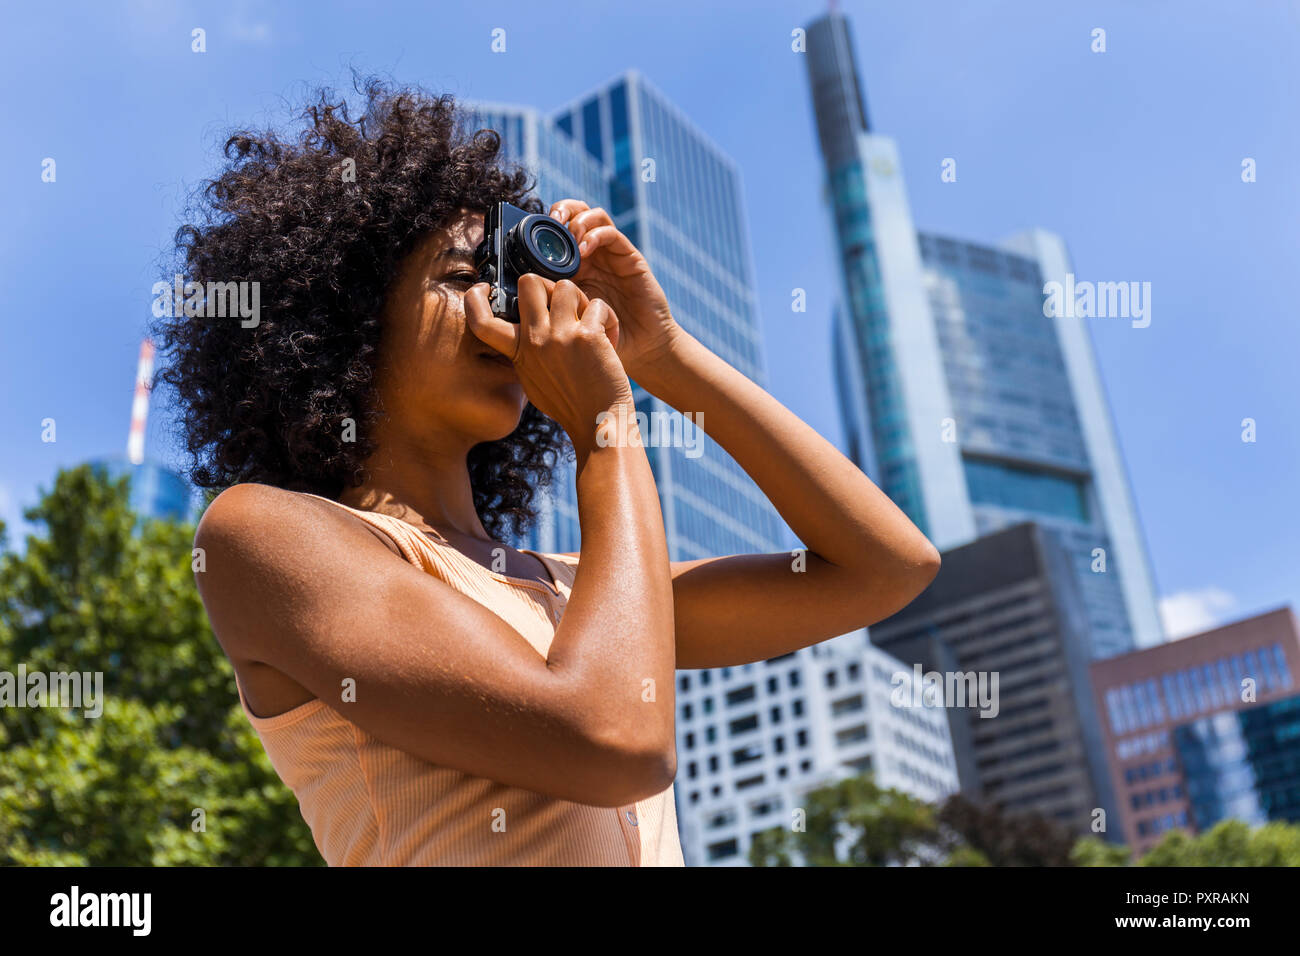 Germany, Frankfurt, young woman with curly hair taking photos in the city Stock Photo